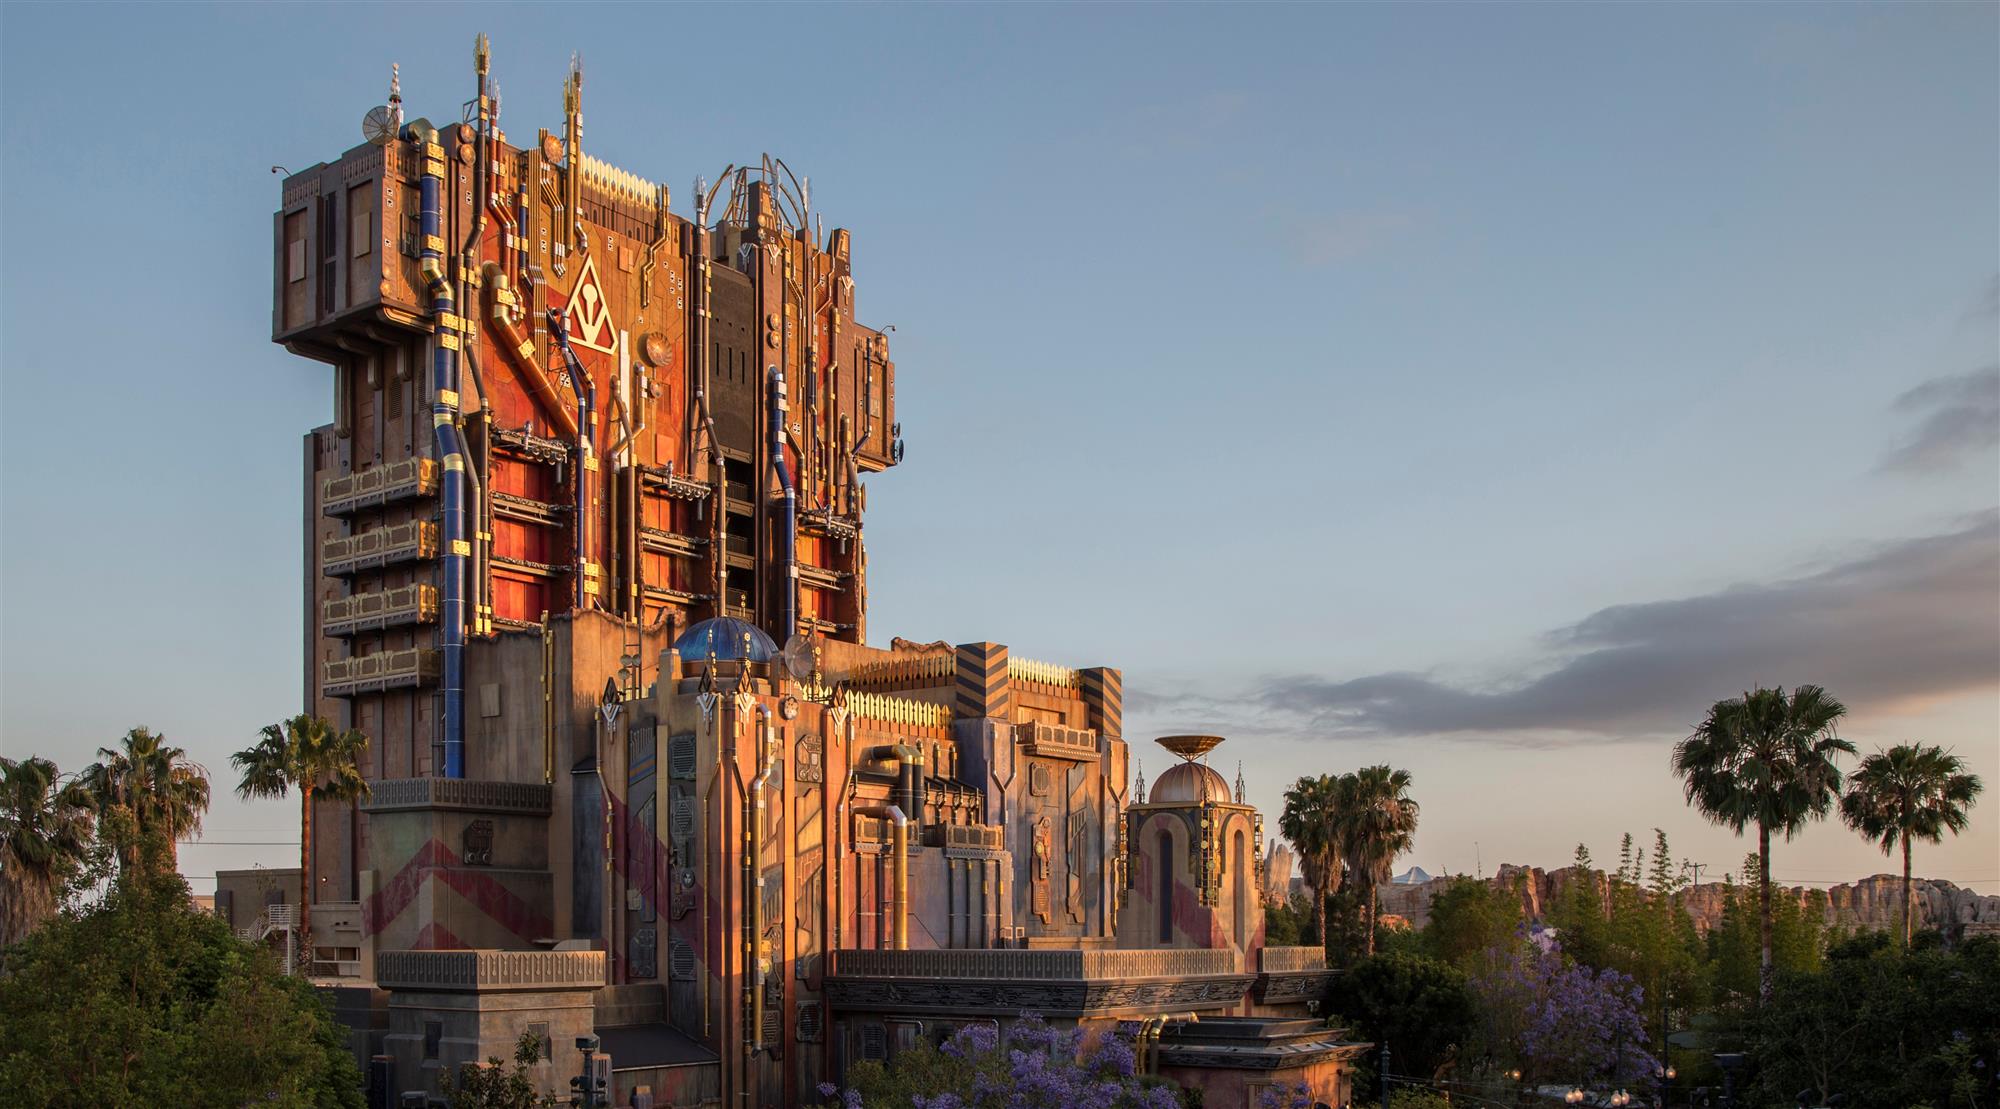 guardians of the galaxy - mission: breakout! california adventure